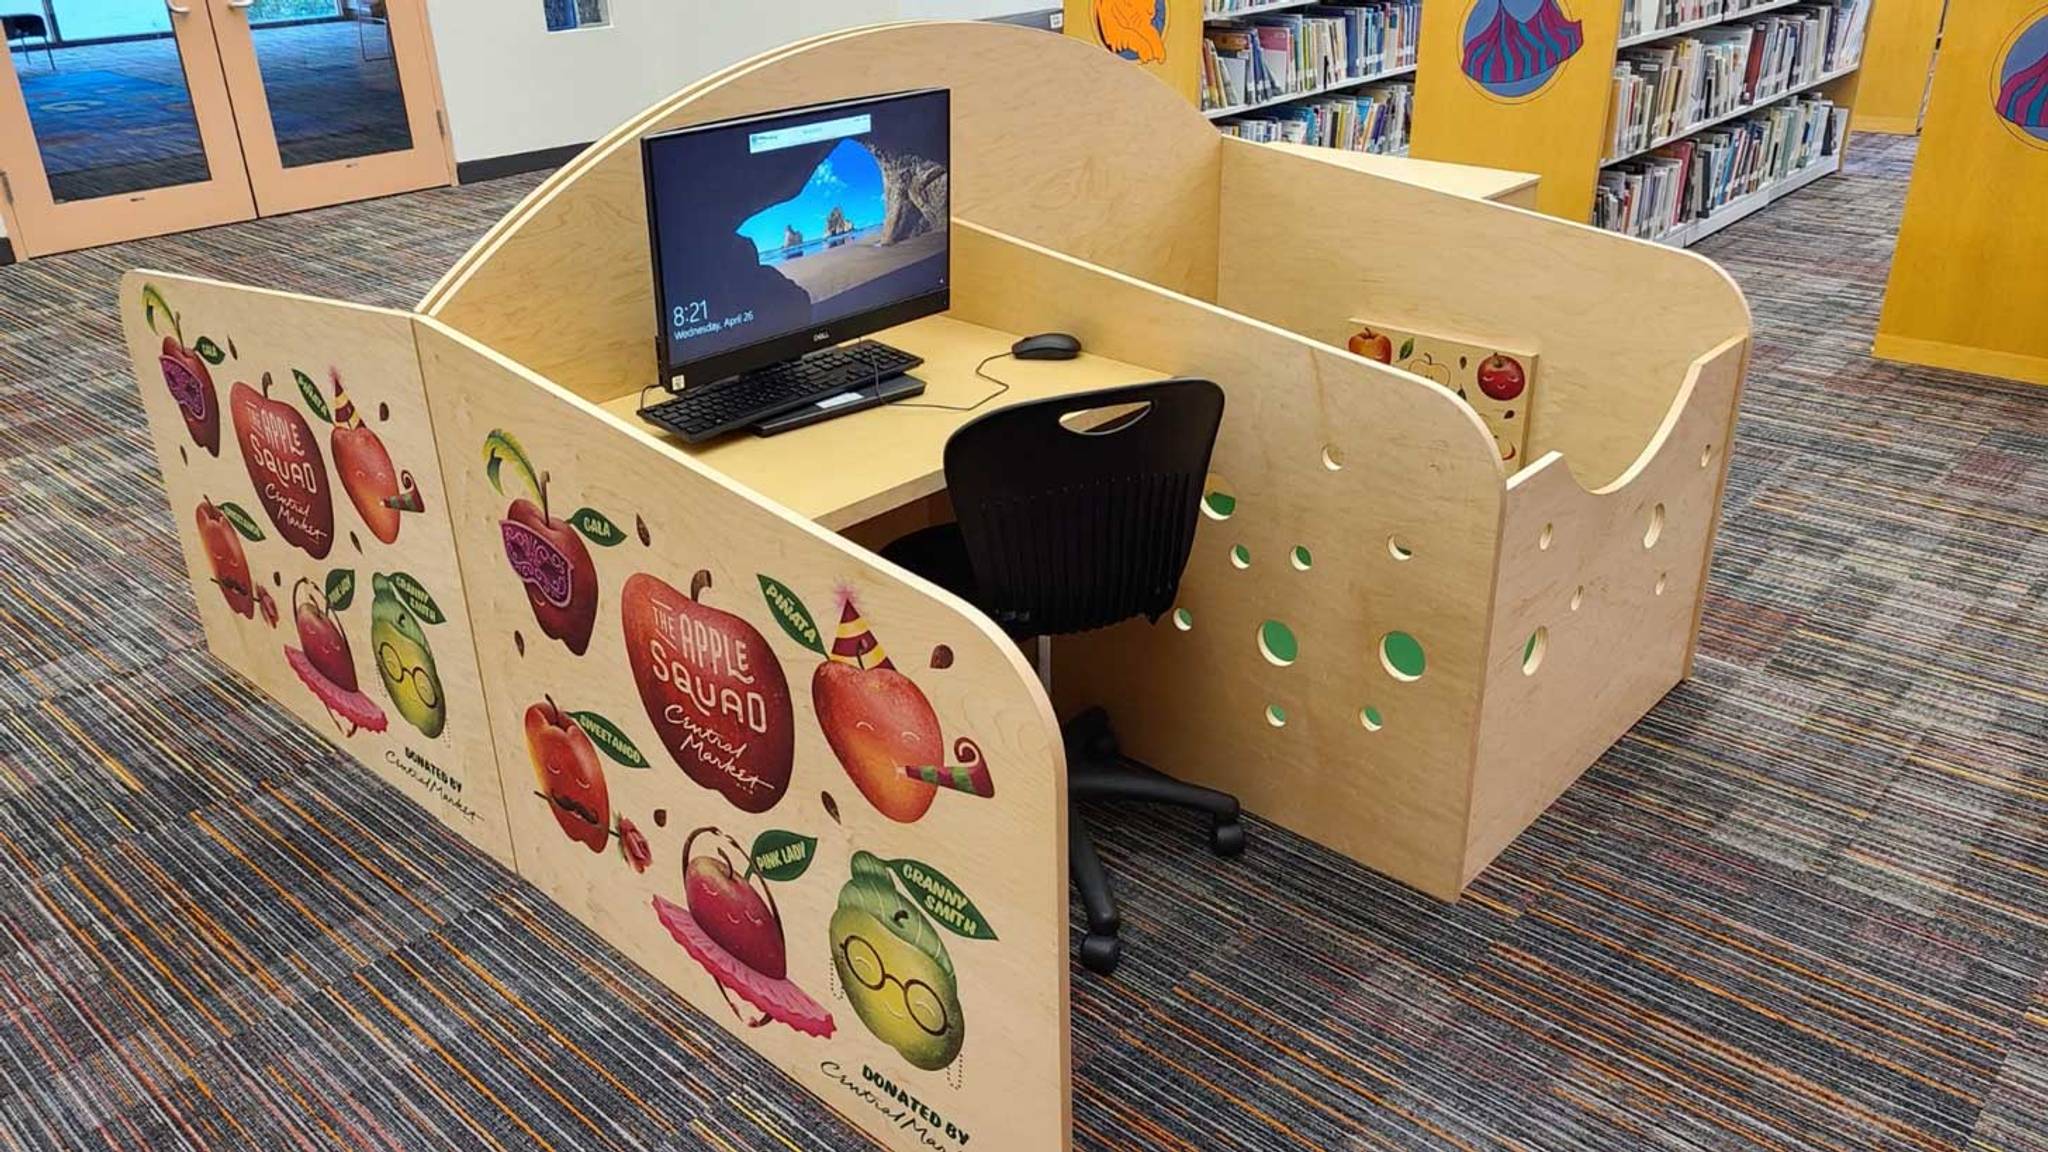 US libraries are dedicating workstations to parents